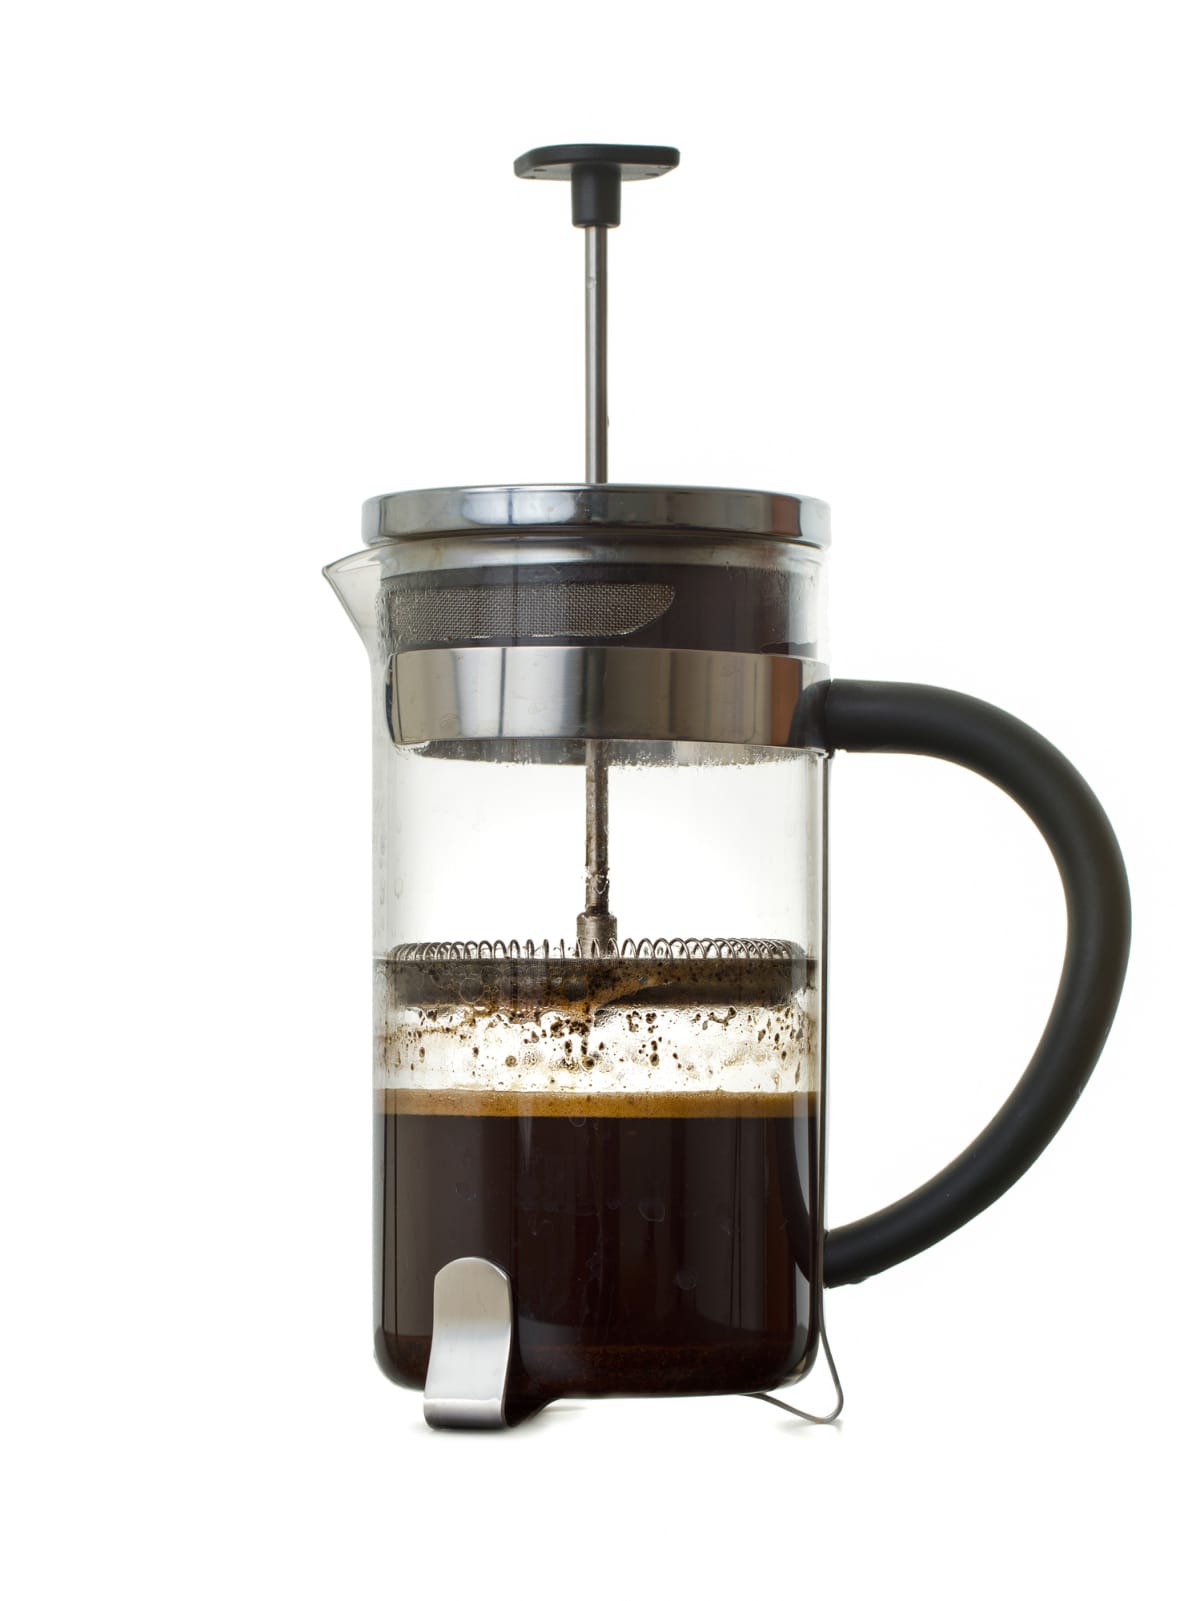 French press on white background